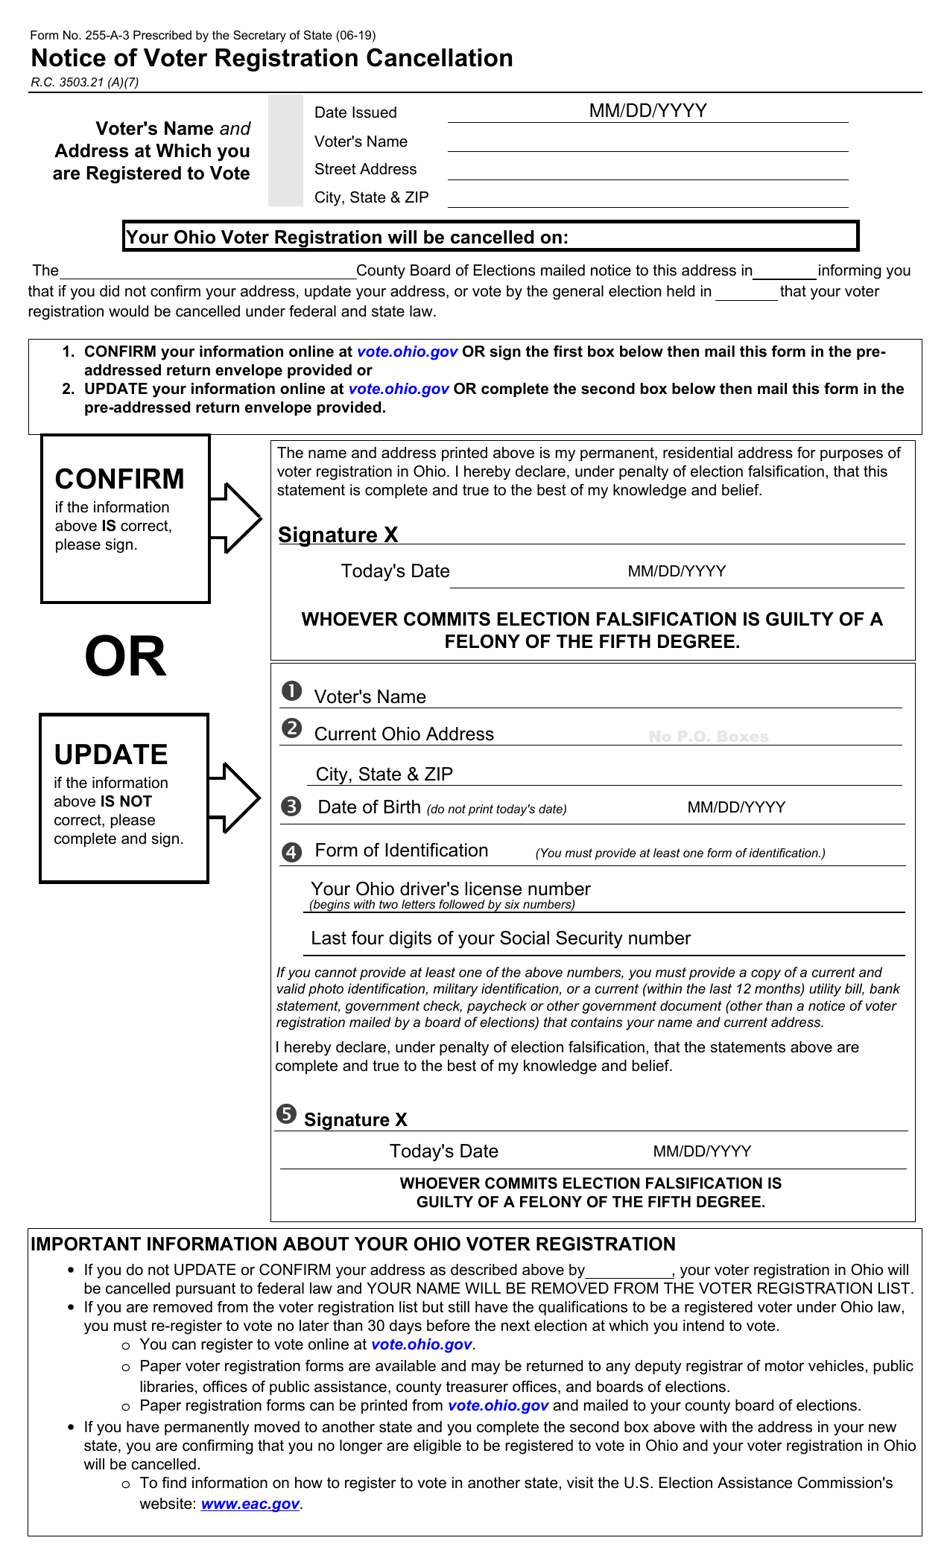 Form 255-A-3 Notice of Voter Registration Cancellation - Ohio, Page 1